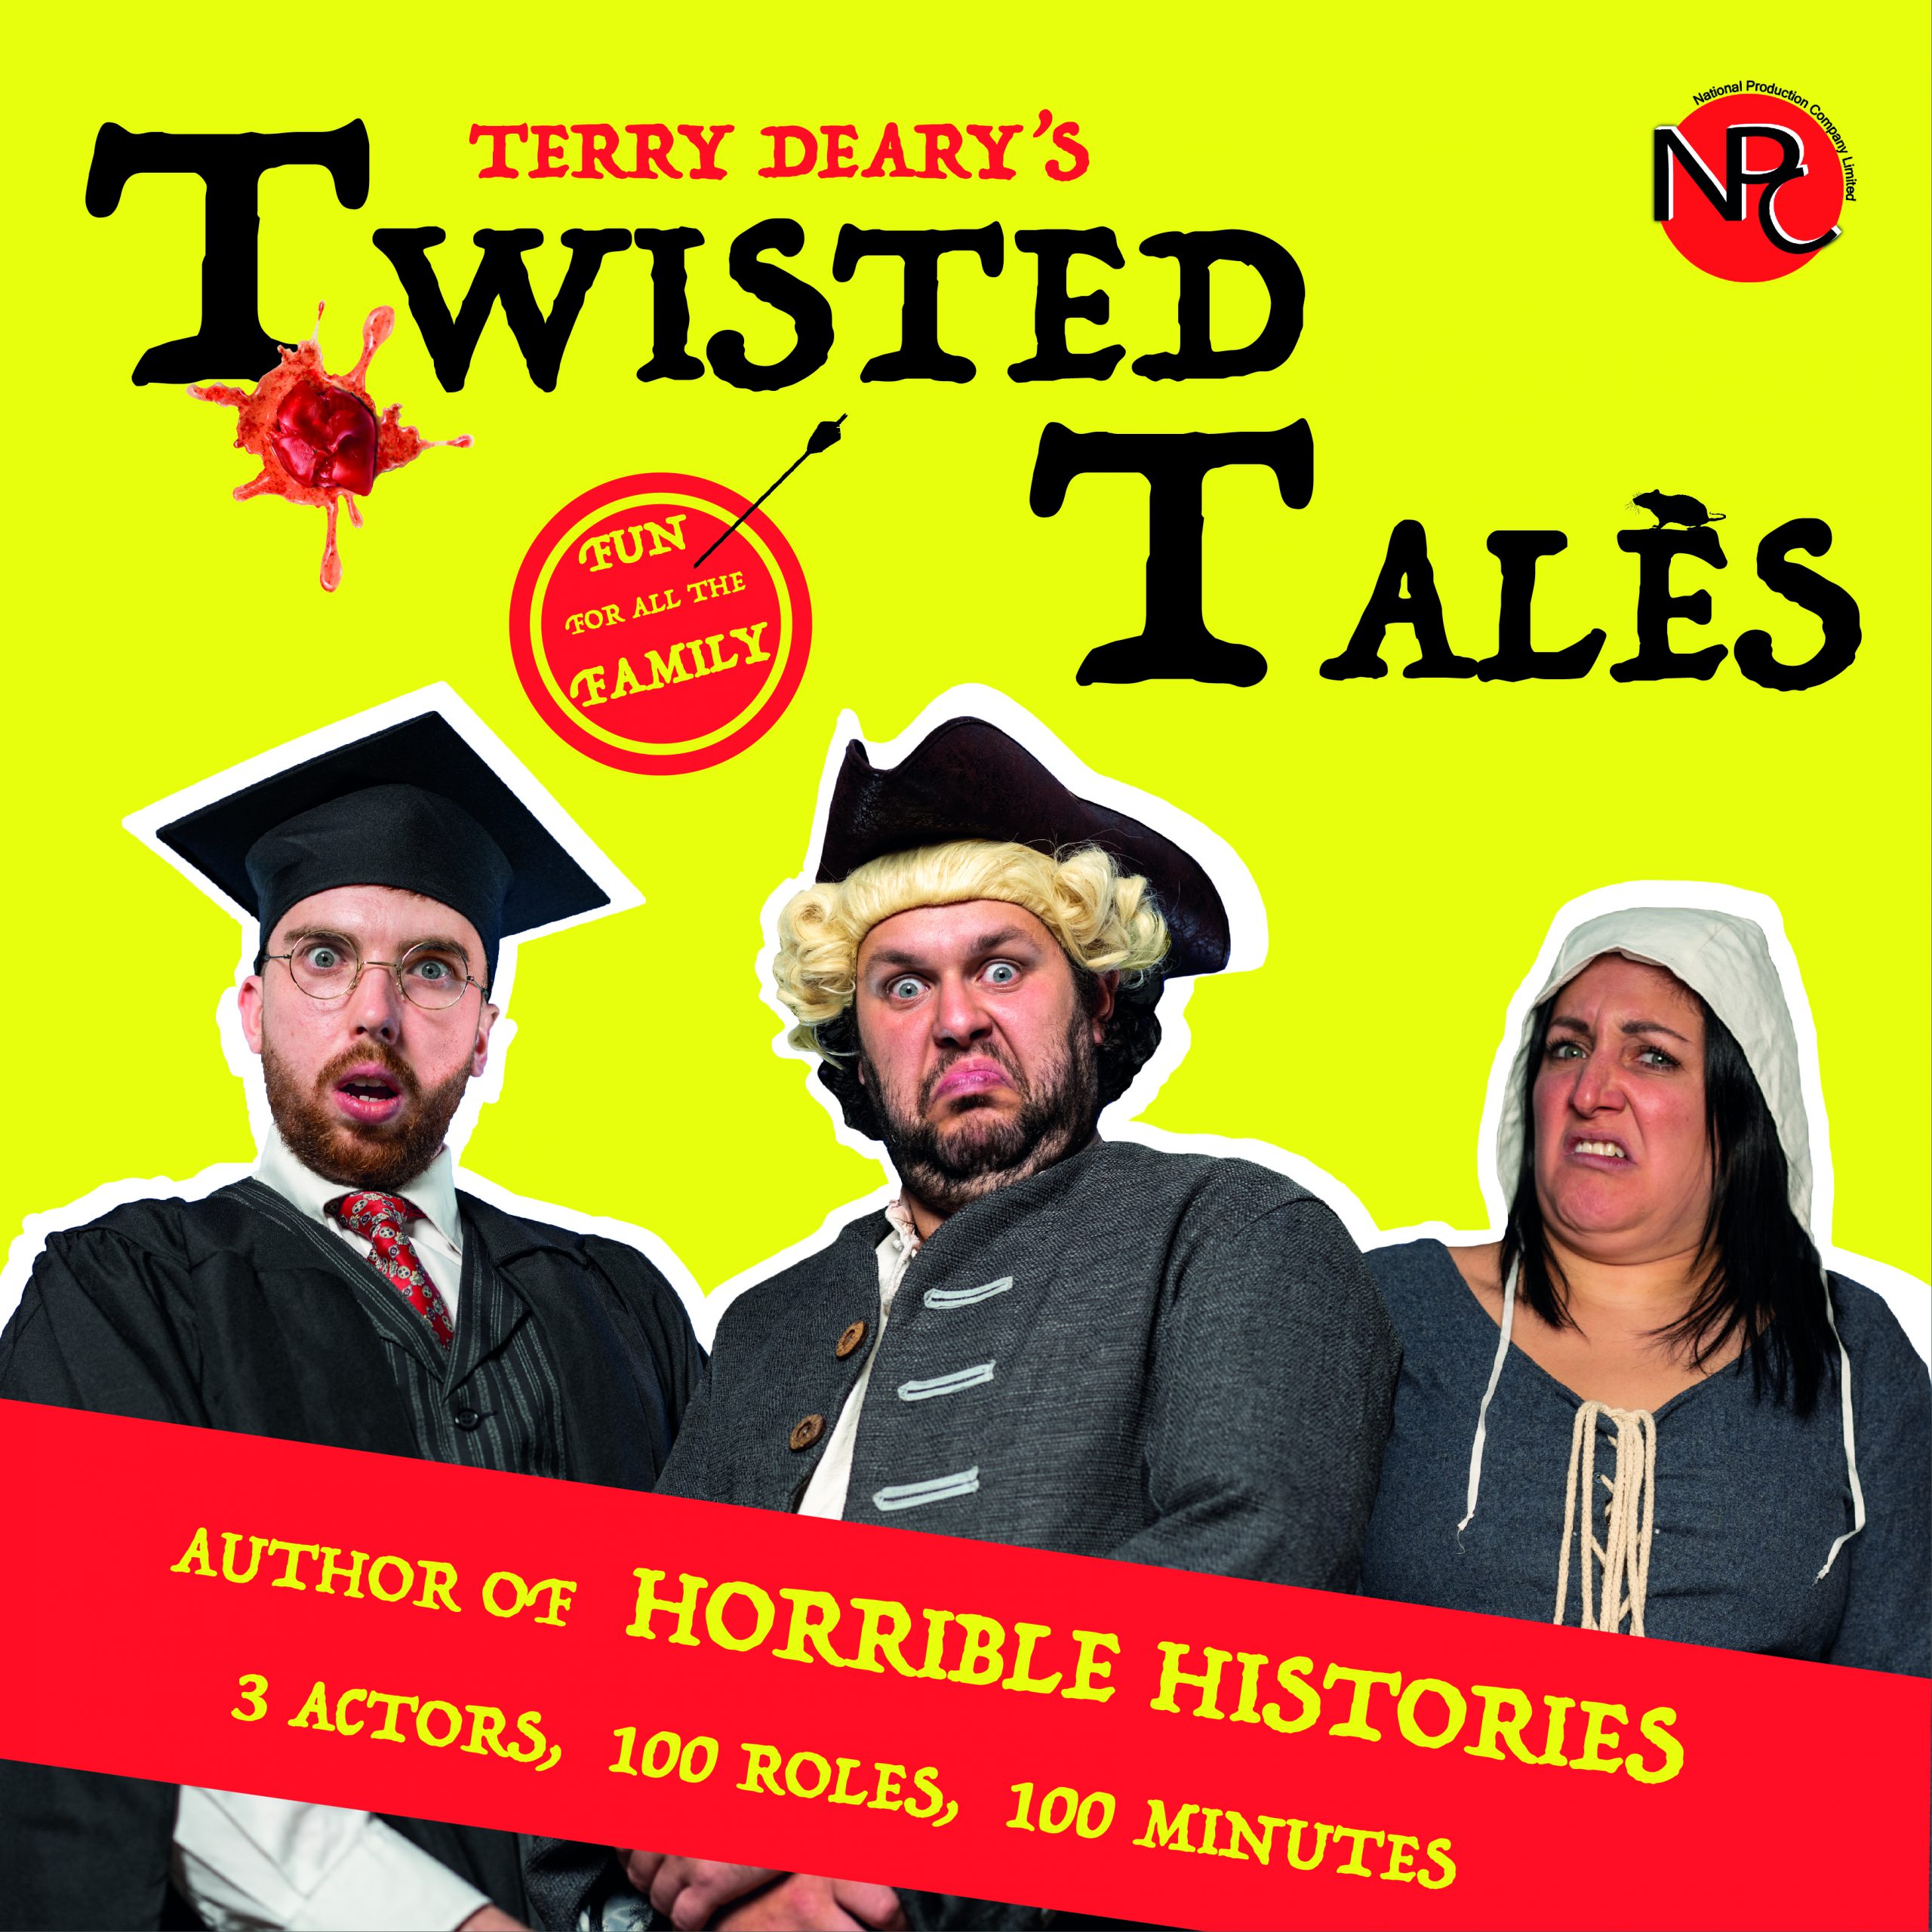 Terry Deary’s Twisted Tales